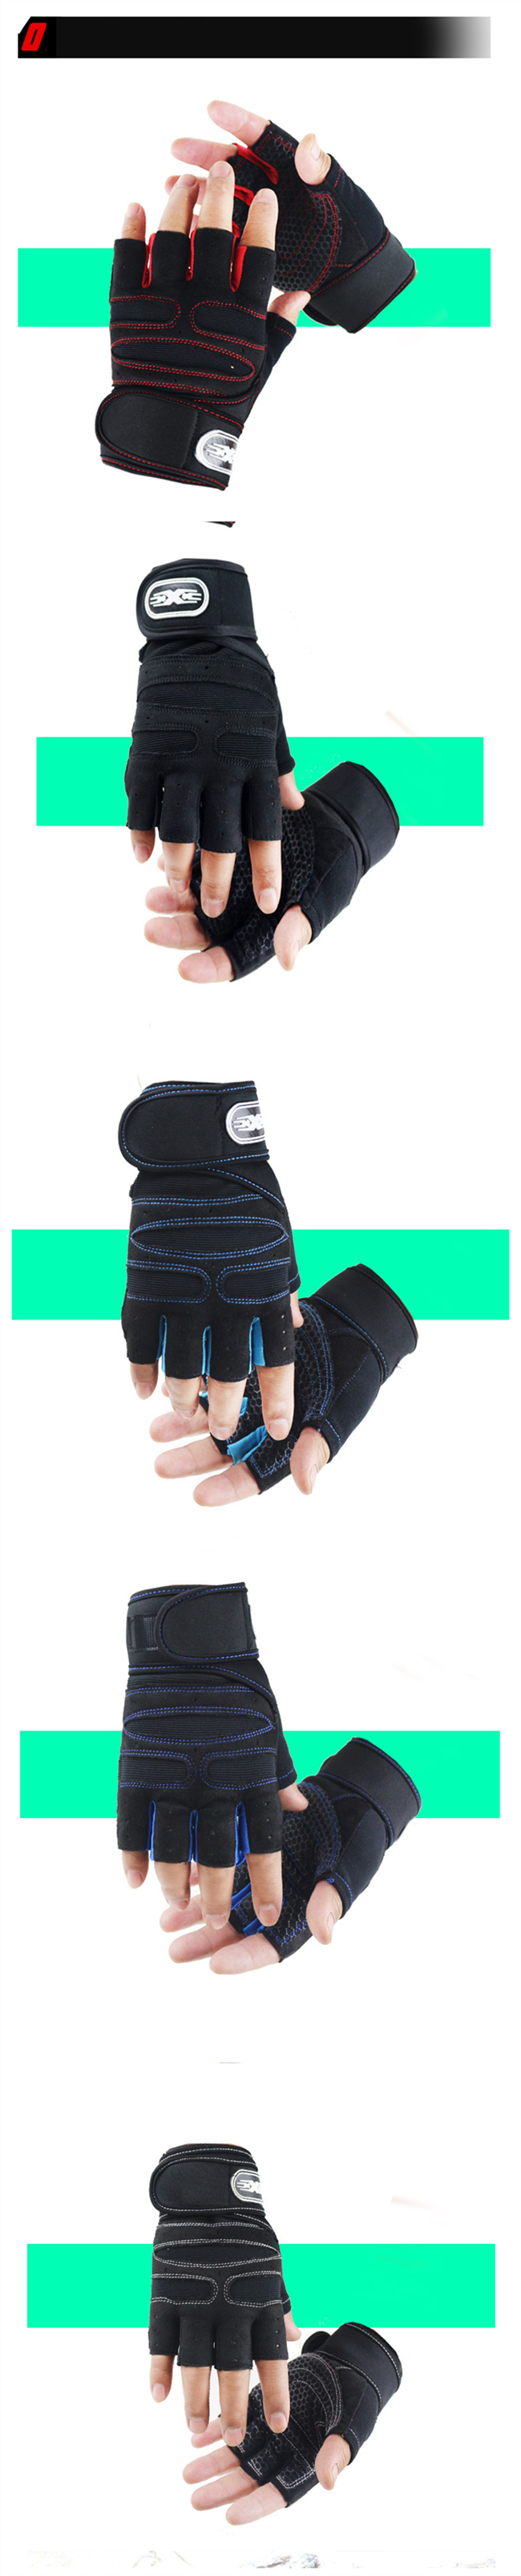 Half Finger Sports Hand Protection Gloves China Supplier.png